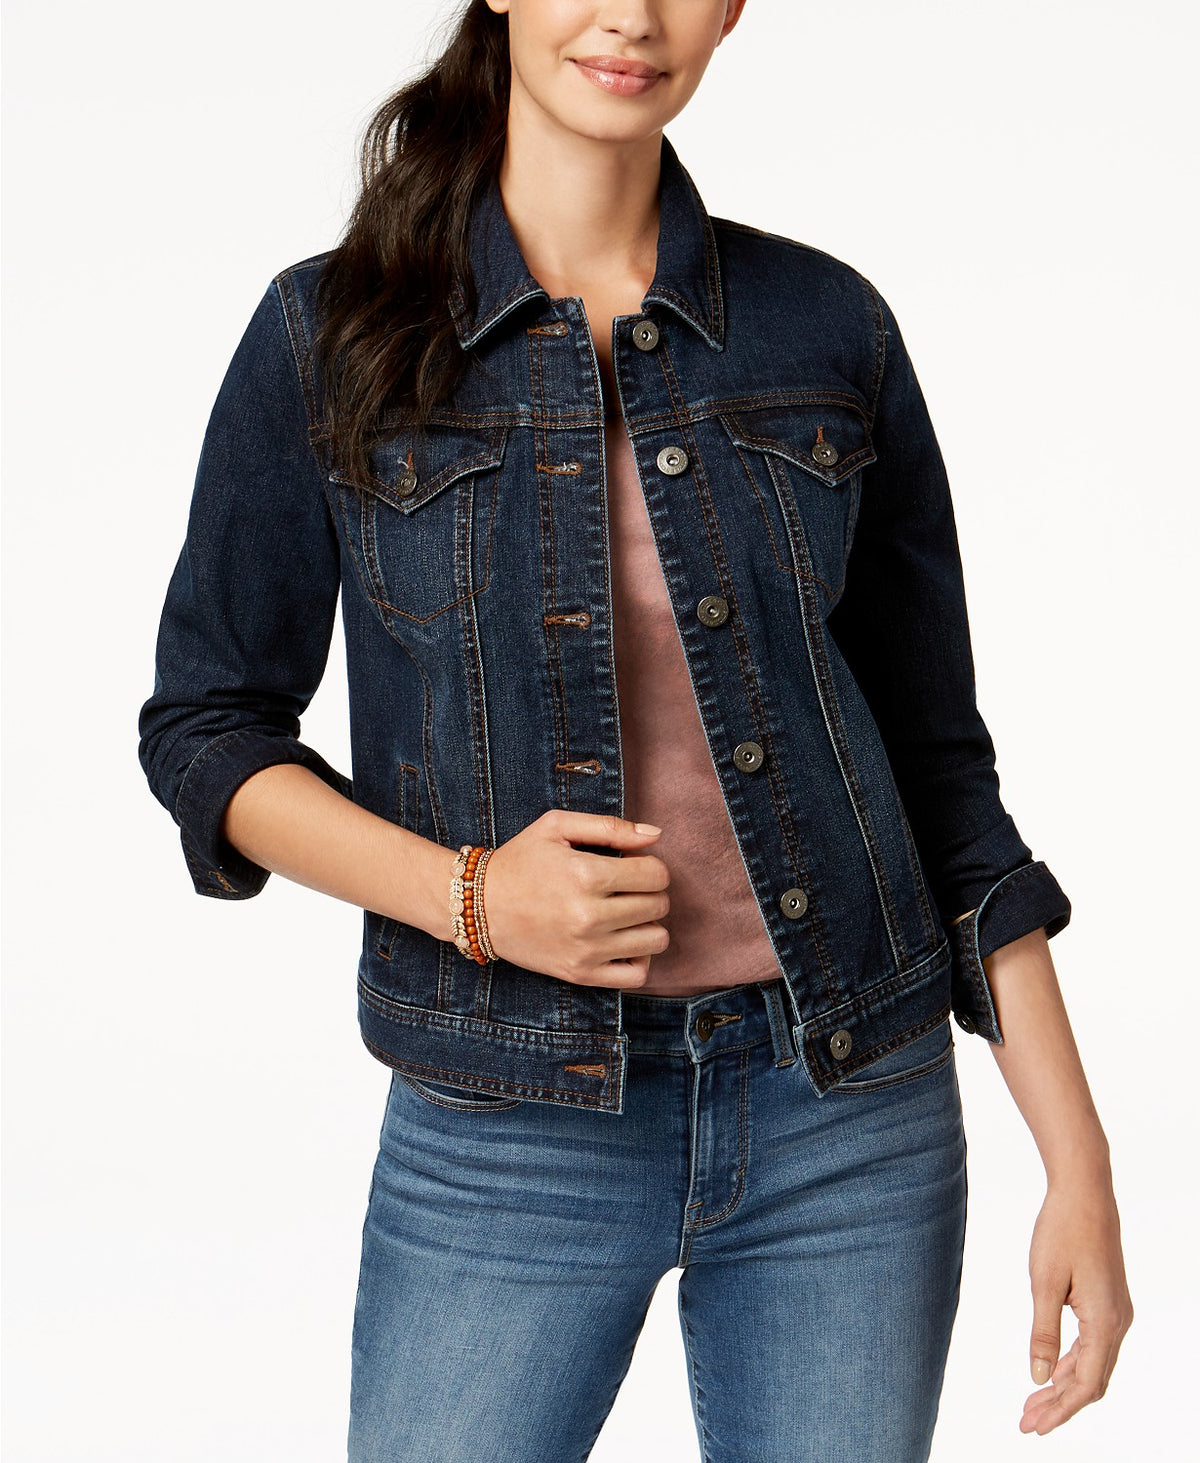 Classic Denim Jacket: Women's dark blue solid-colored denim jacket with button closure and front pockets.